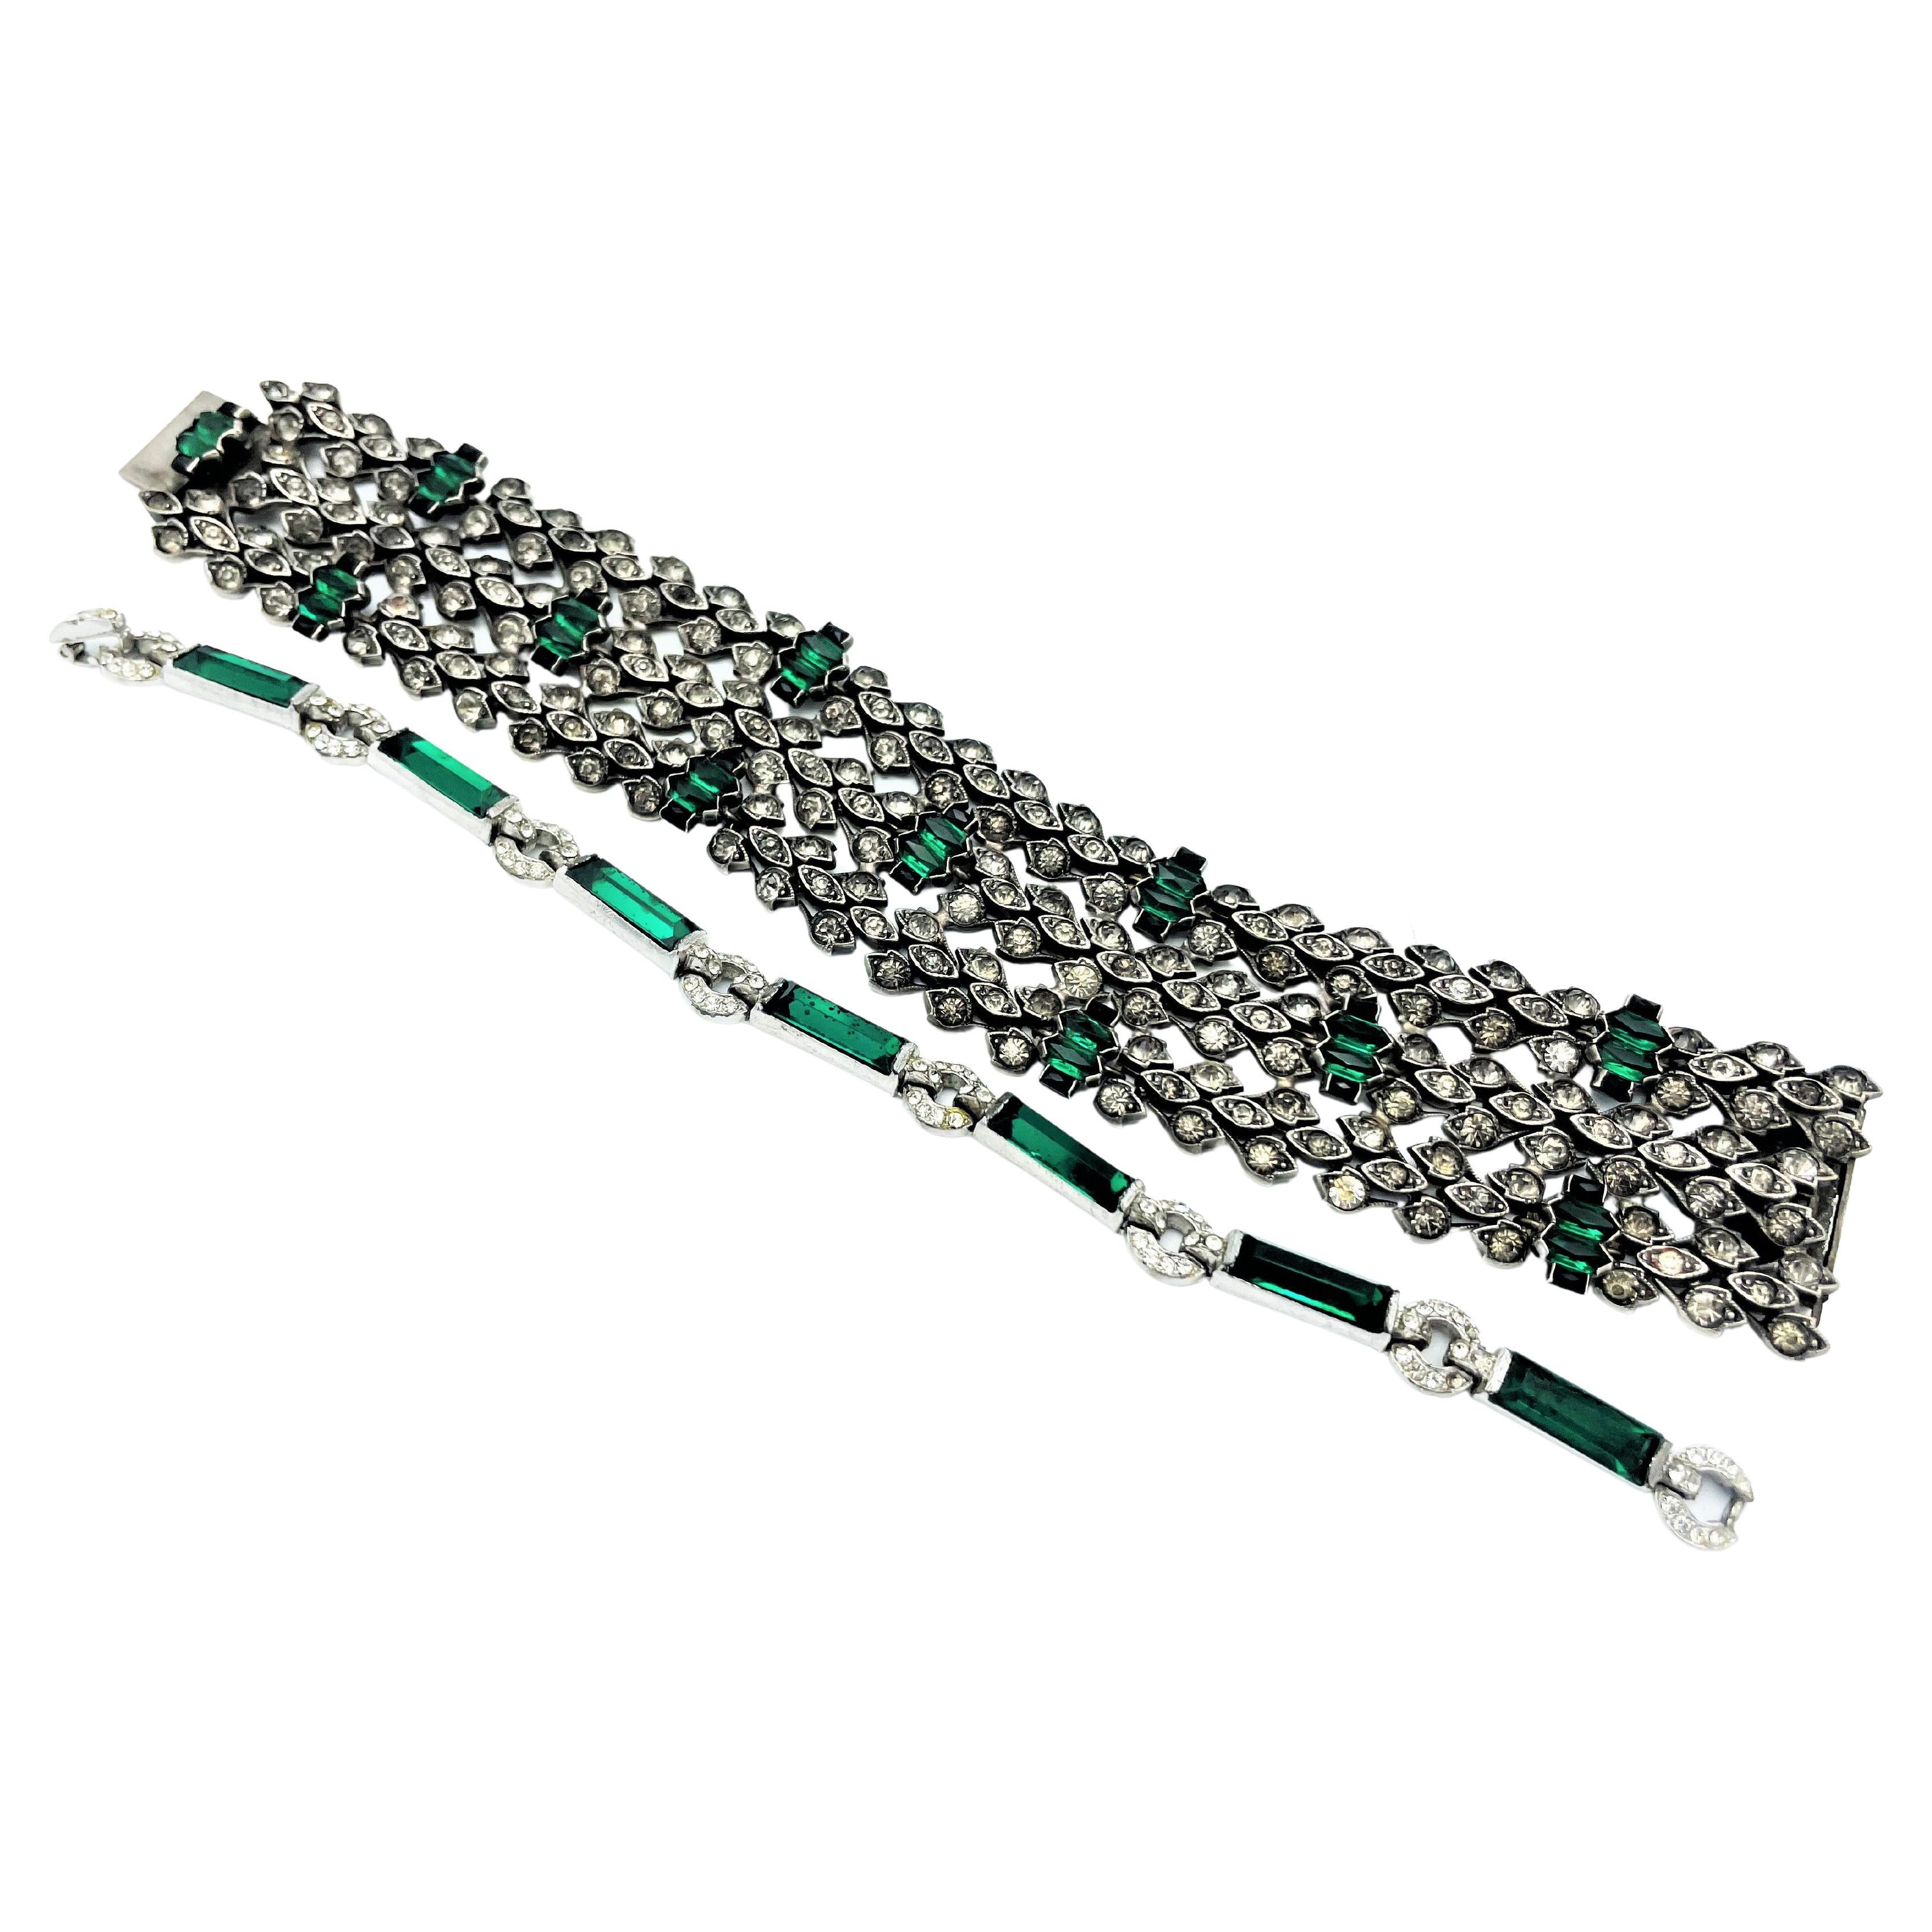 THIS BEAUTIFULLY CRAFTED BRACELET MUST HAVE BEEN WORKED WITH SIMPLE RHINESTONES BY A FRENCH JEWELER IN THE 1940s ! STERLING SILVER  !
Every single clear and polished rhinestone has its own silver setting.
3 rows of small silver diamonds are combined